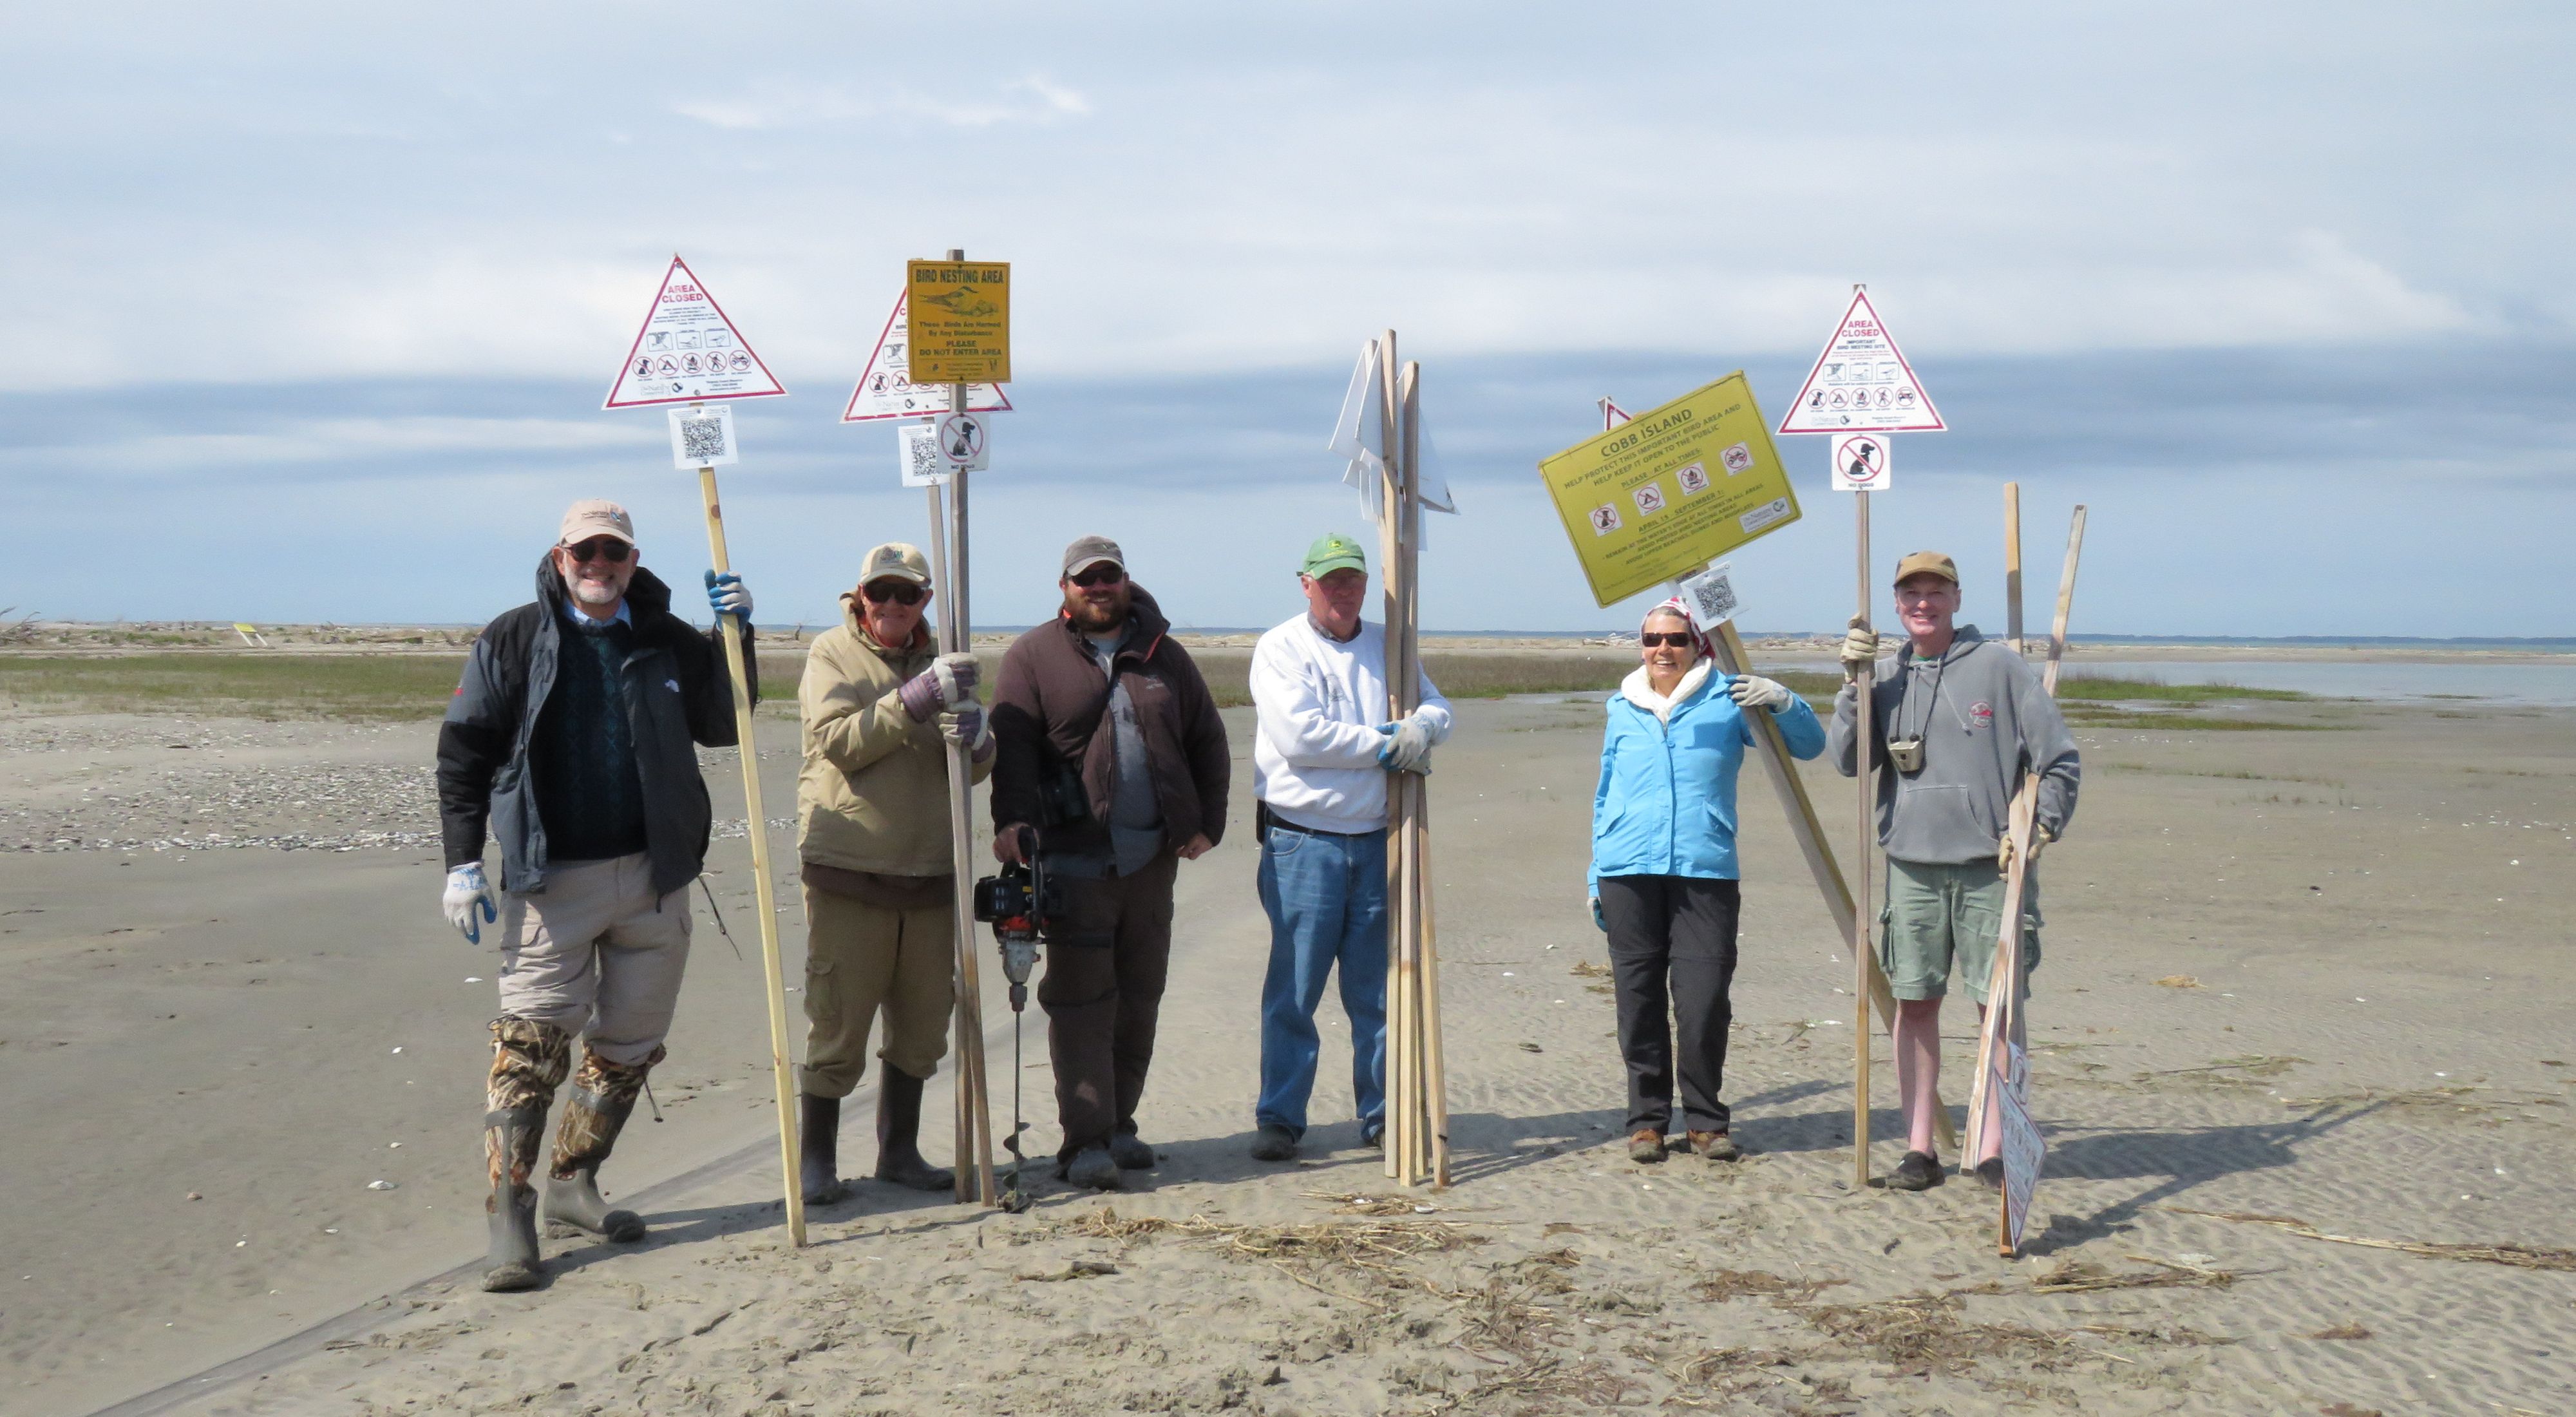 TNC's Island Stewardship team stands on the sands of Virginia's Eastern Shore for training in 2018. 